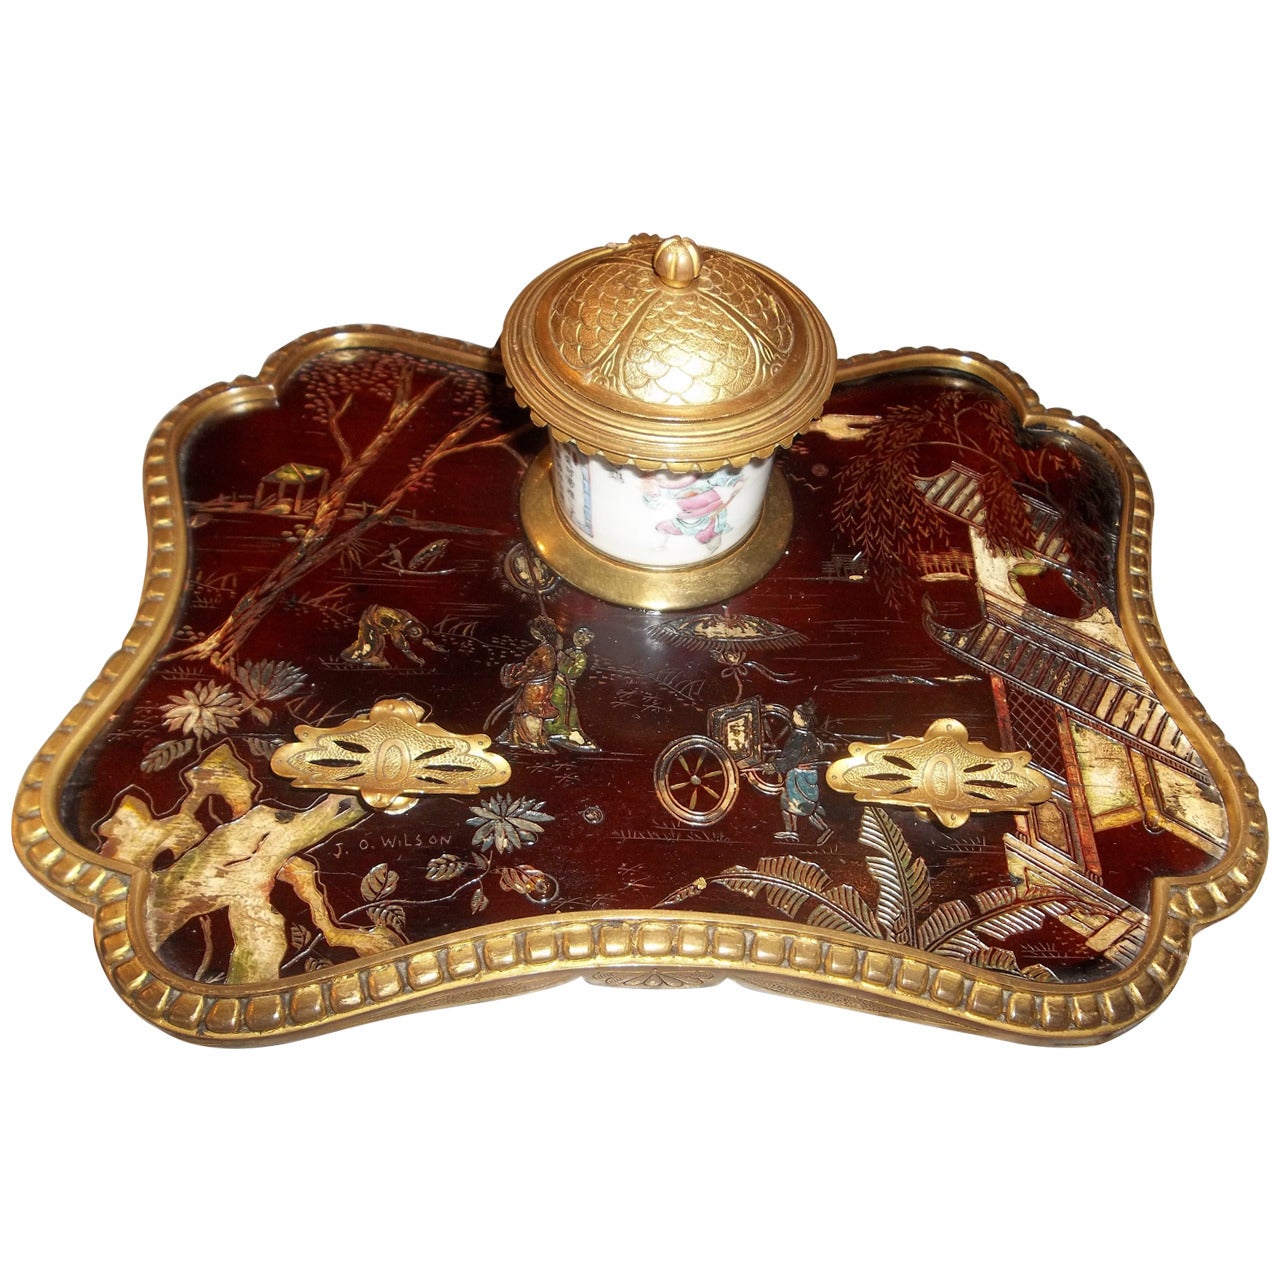 Japanned or Chinoiserie Decorated Louis XV Style Lacquer Inkwell For Sale